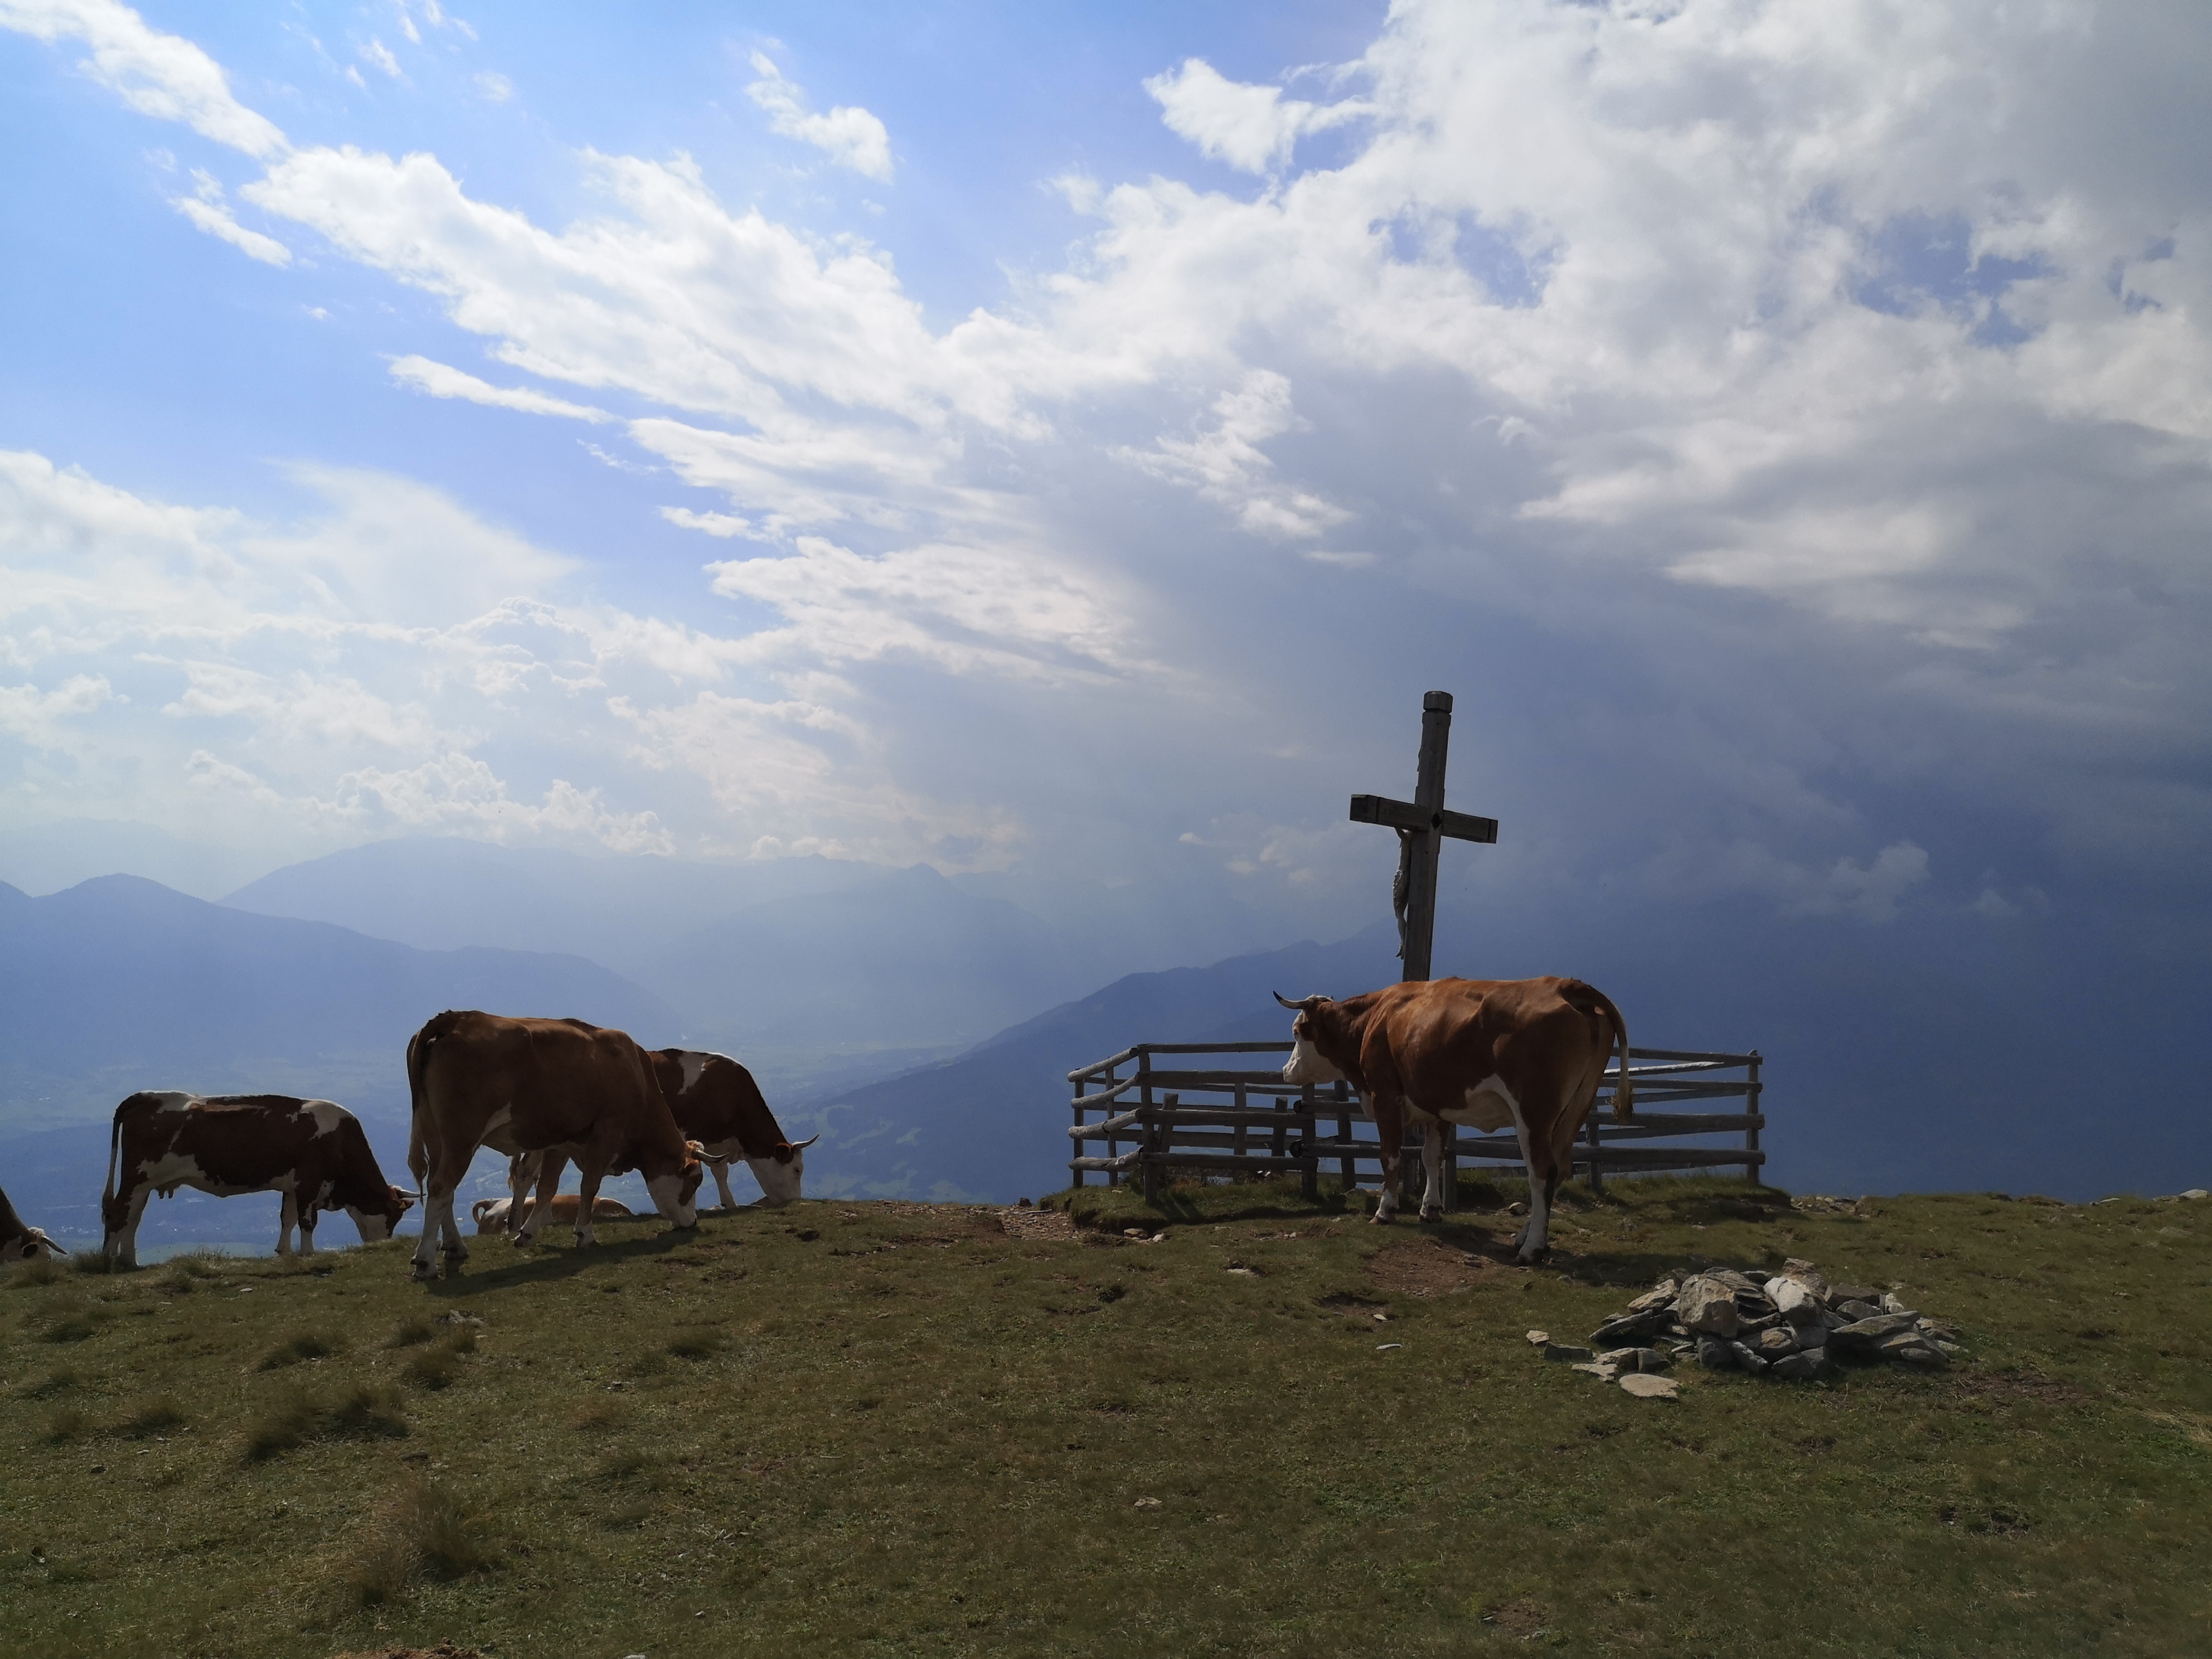 Hiking in Austria on the Alpe Adria Trail - Stage 12